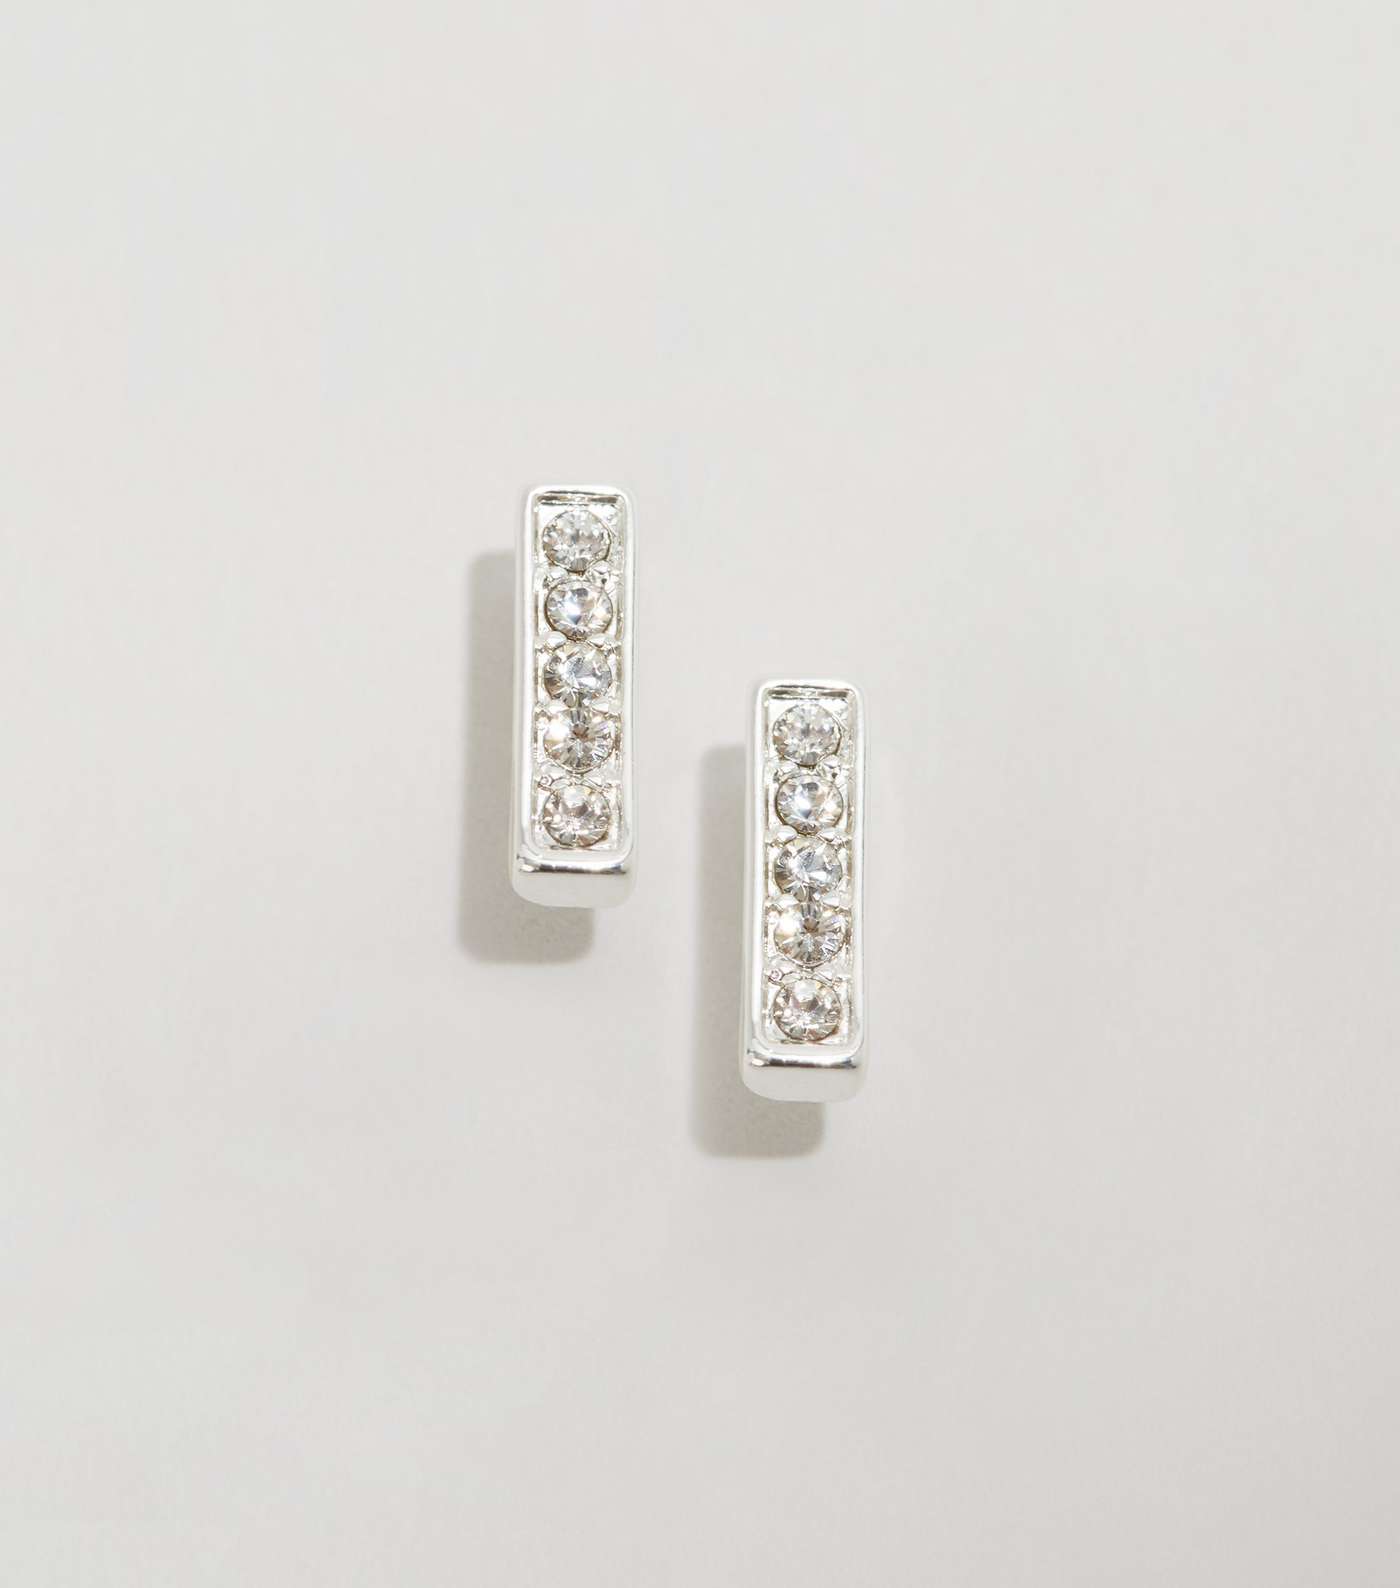 Silver Plated Stick Stud Earrings with Crystals from Swarovski® Image 3